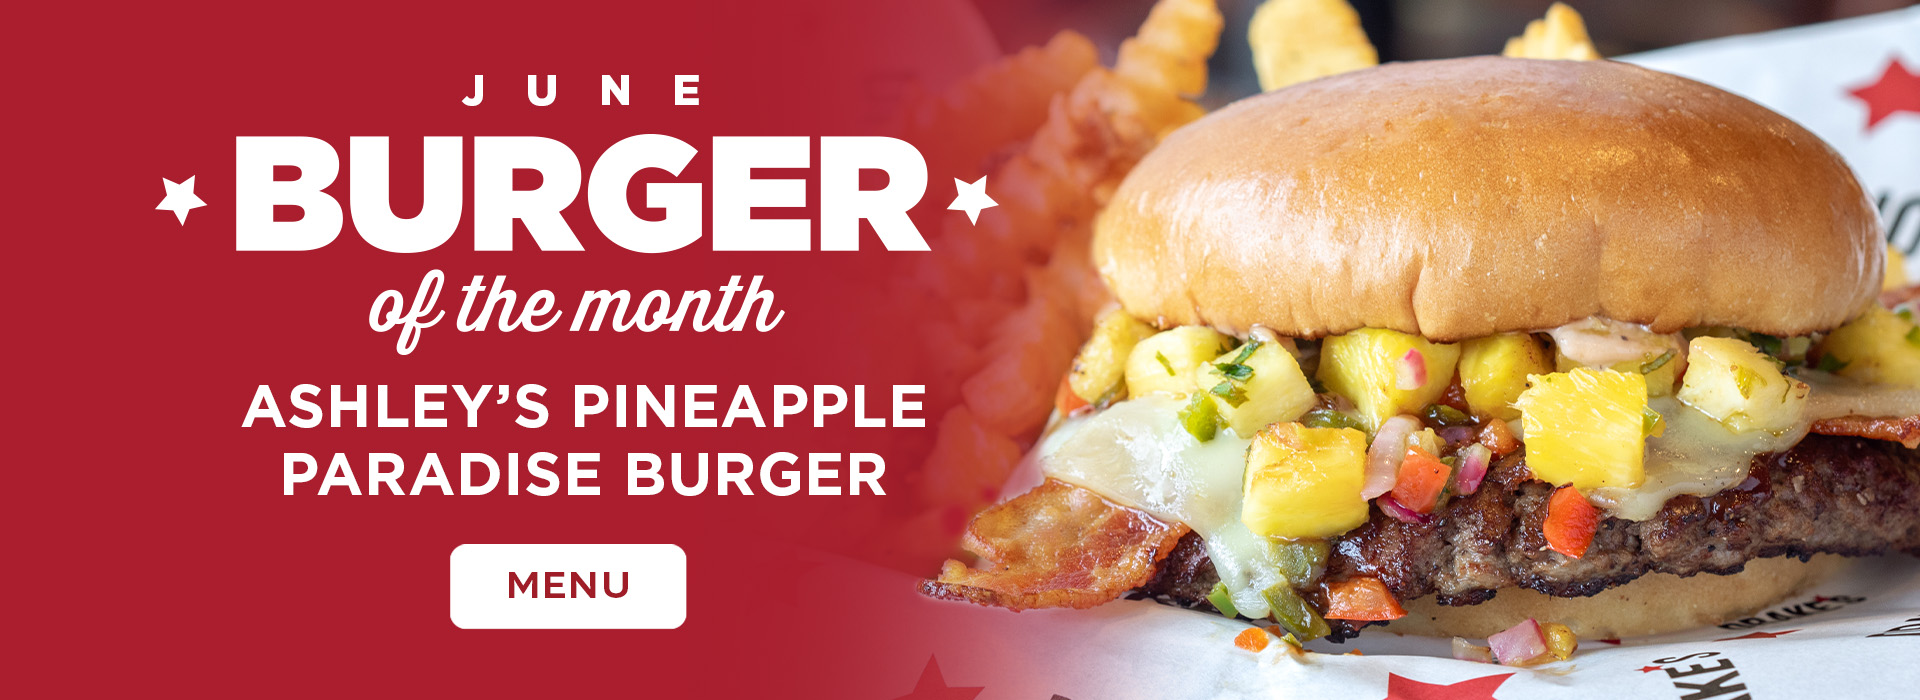 Click or tap here to see our burger of the month special!